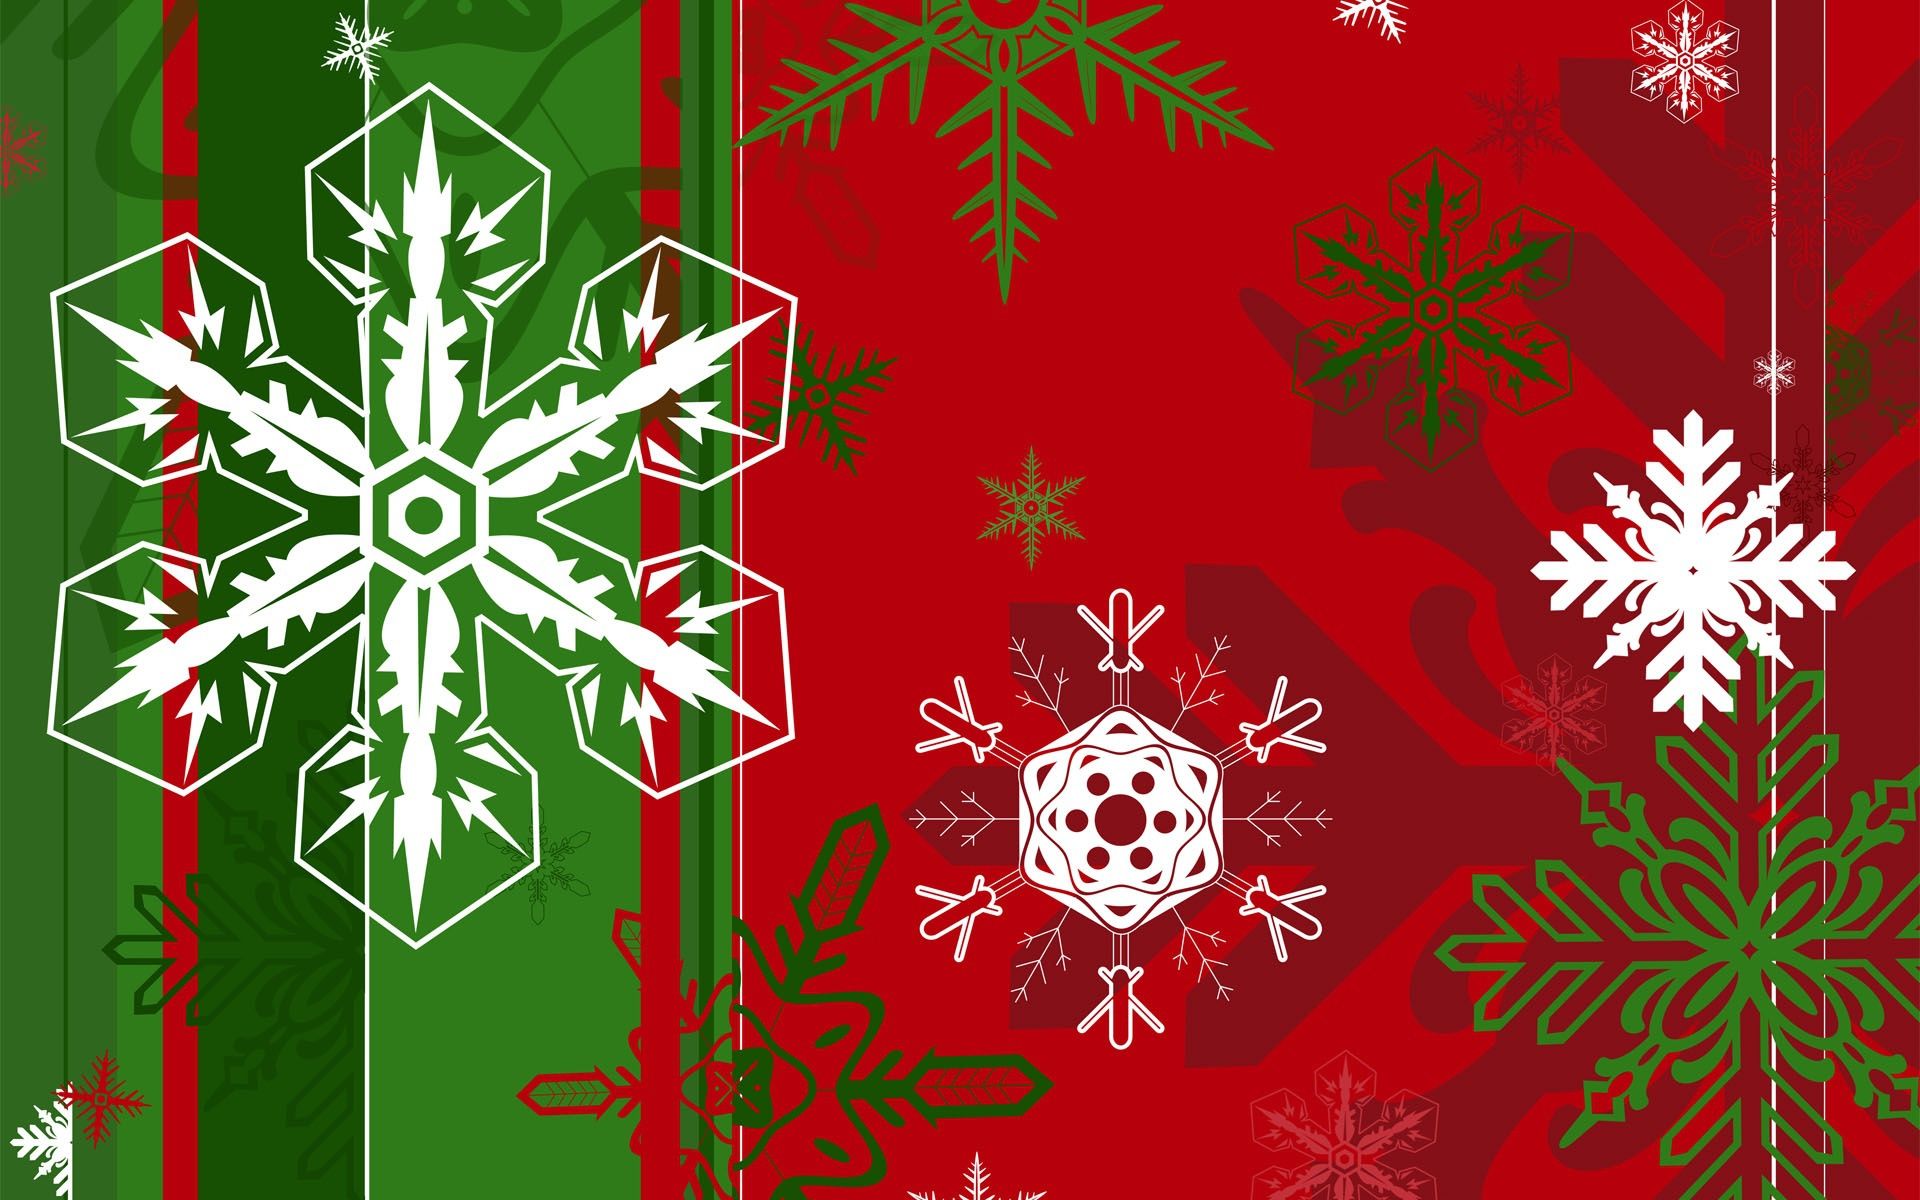 Snowflakes of different shapes on the green and red background on ...